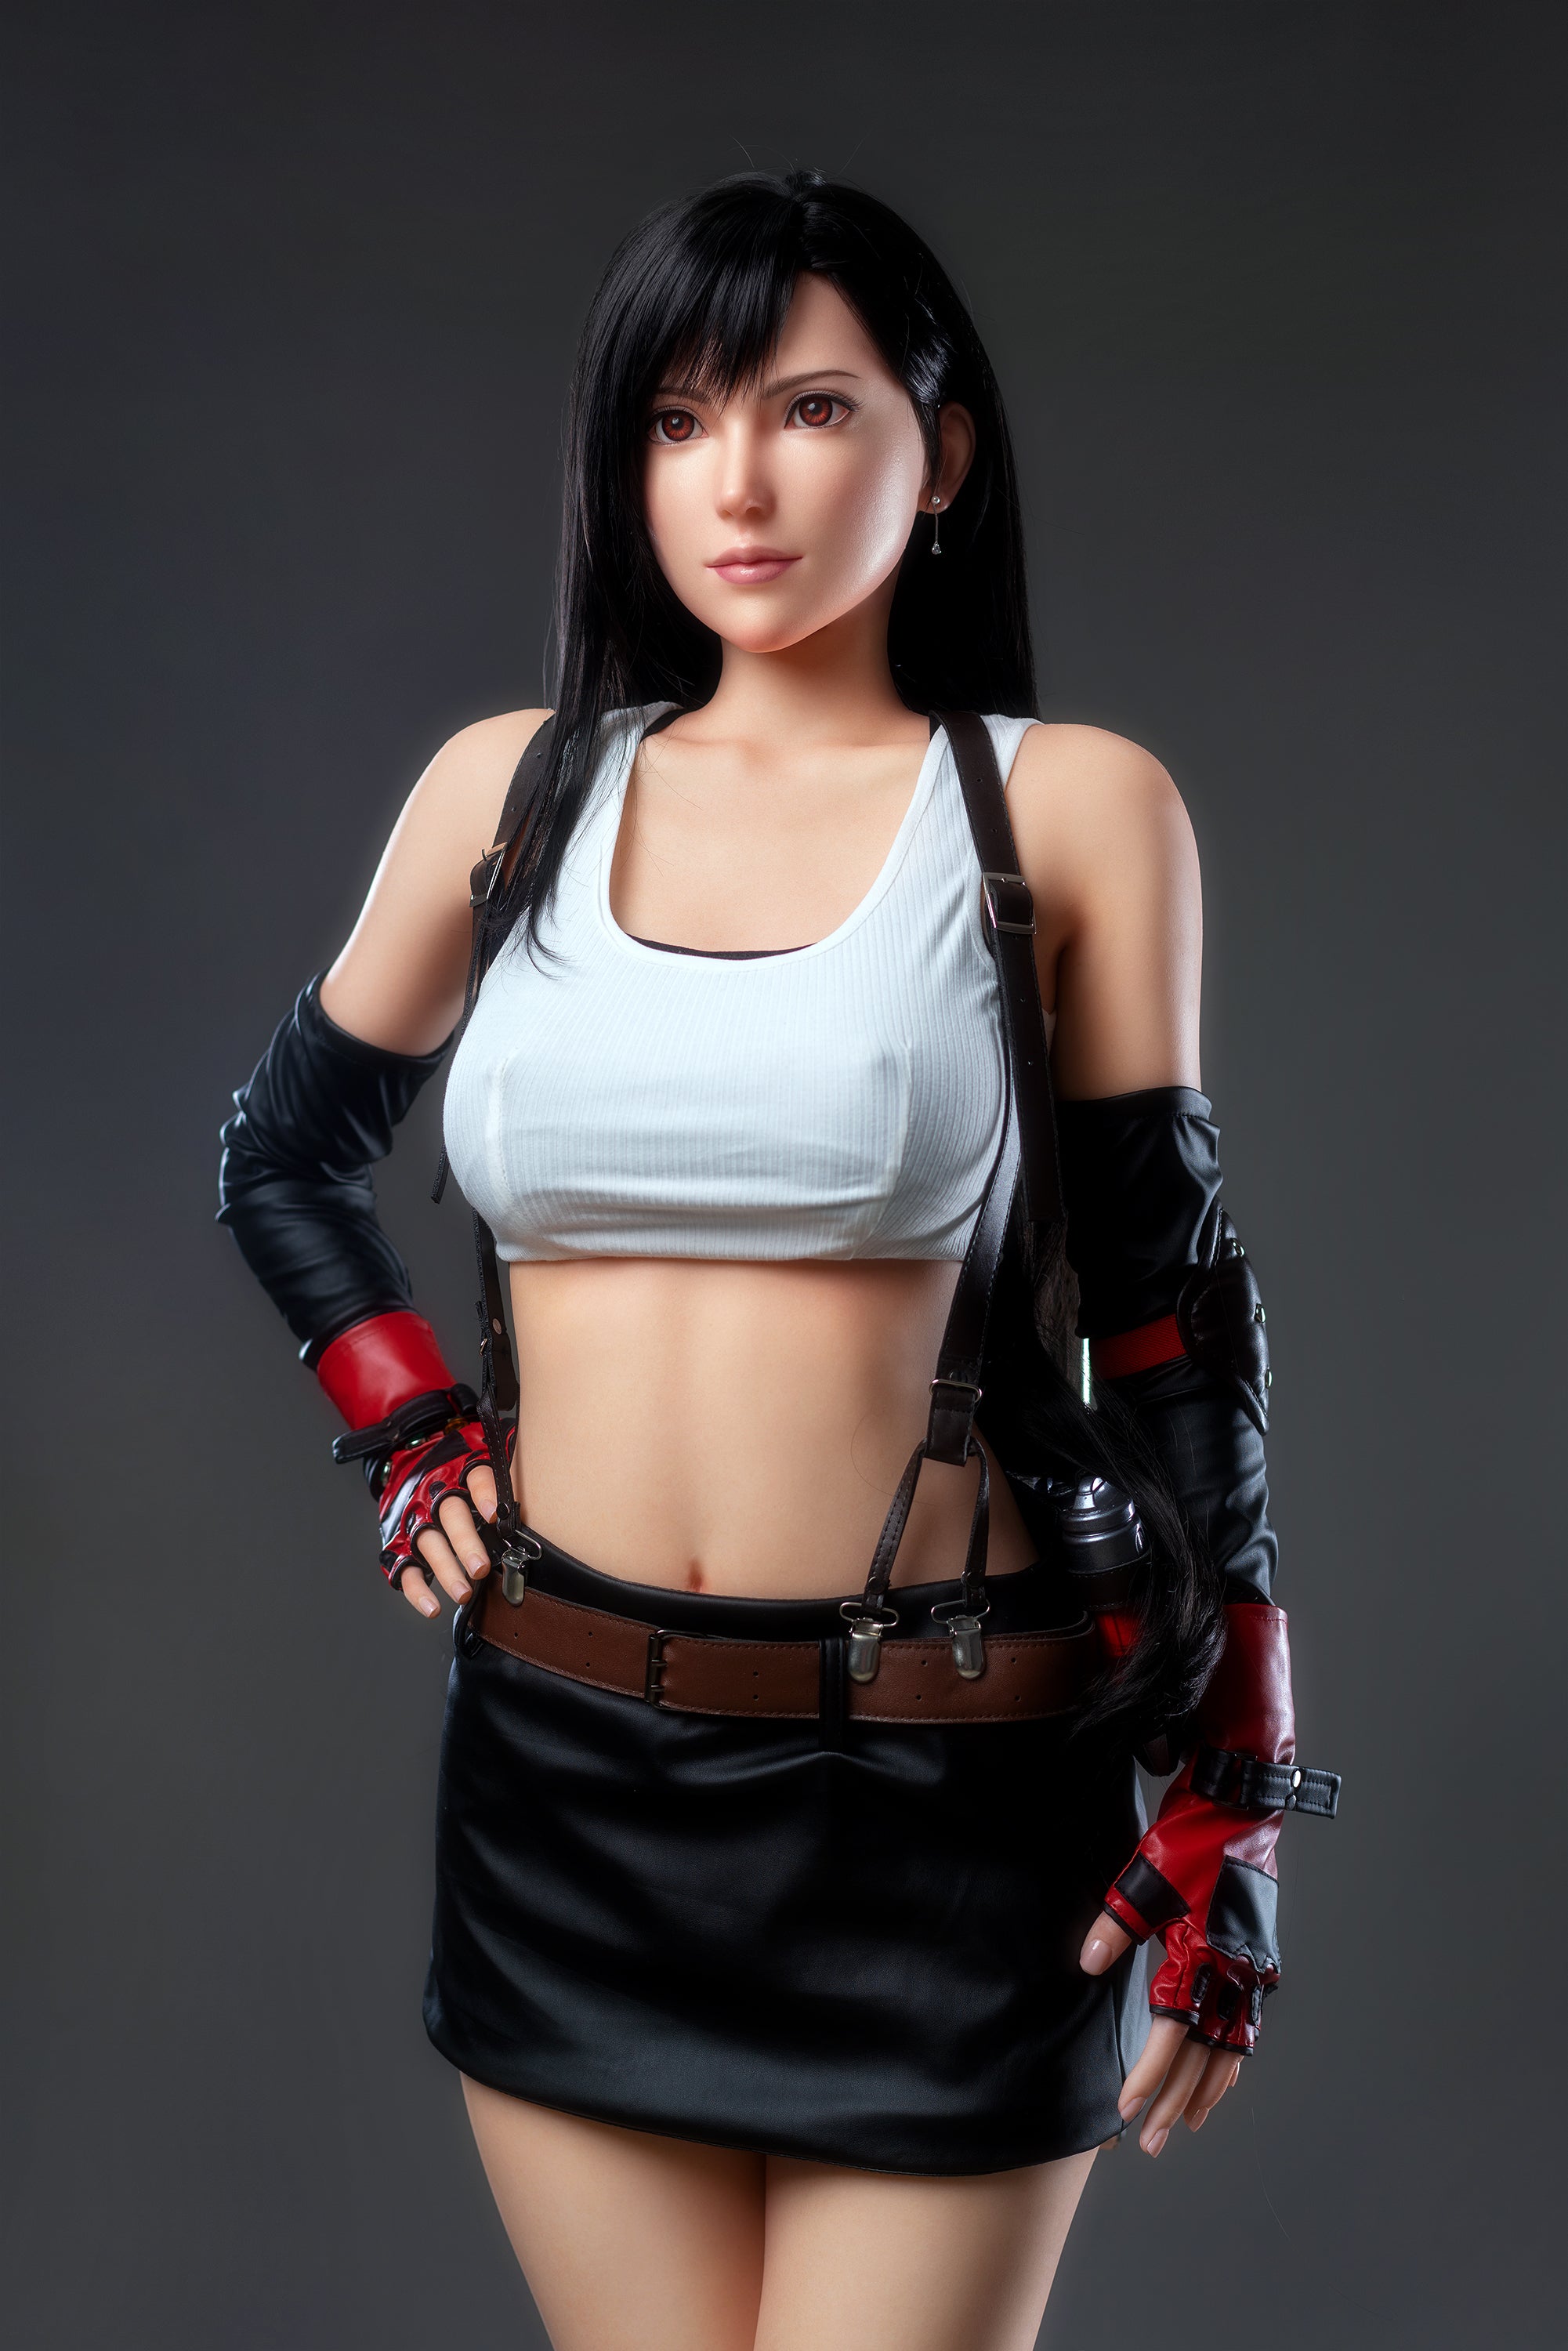 Game Lady 168 cm A Silicone - Tifa | Buy Sex Dolls at DOLLS ACTUALLY